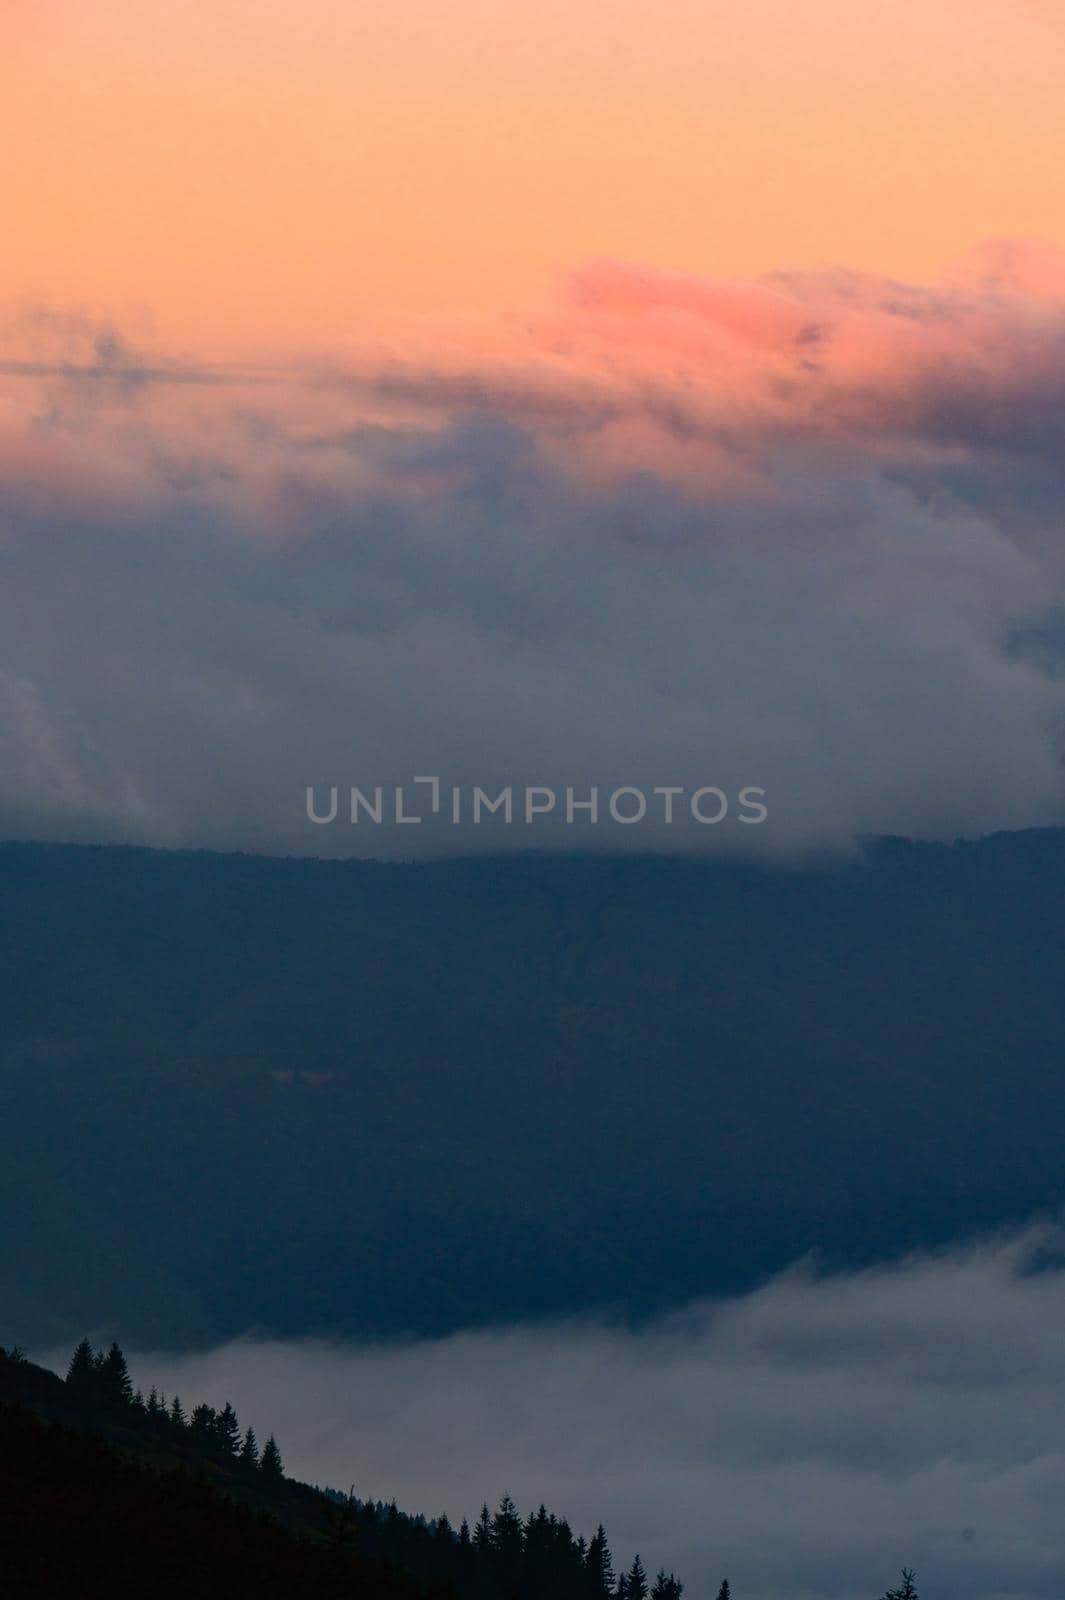 Dawn in the mountains, clouds covered the slopes of the Carpathians, a tourist trip to the Carpathians.